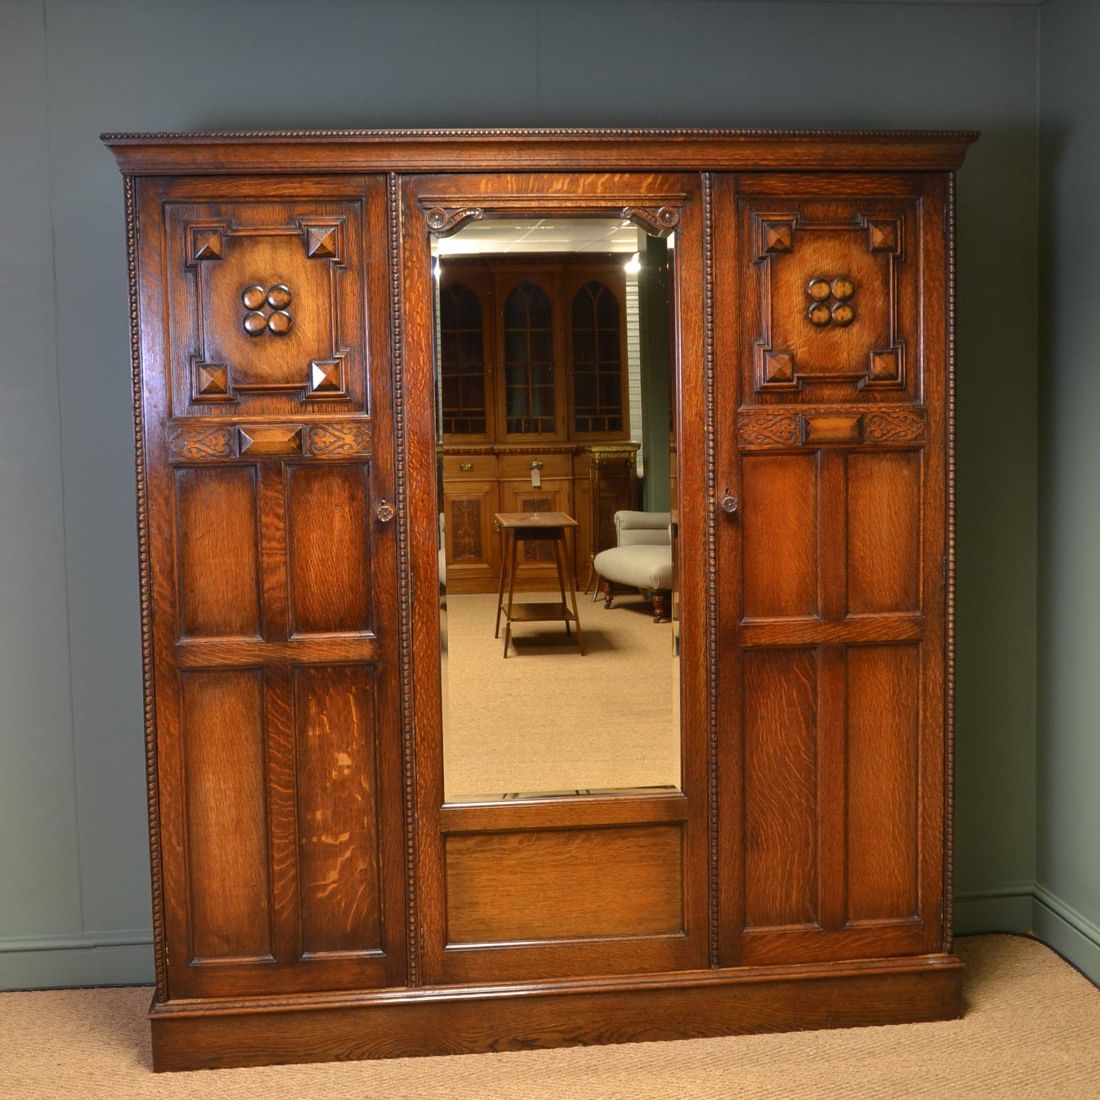 Antique Wardrobes For Sale – Victorian, Georgian & Edwardian With Antique Triple Wardrobes (View 13 of 20)